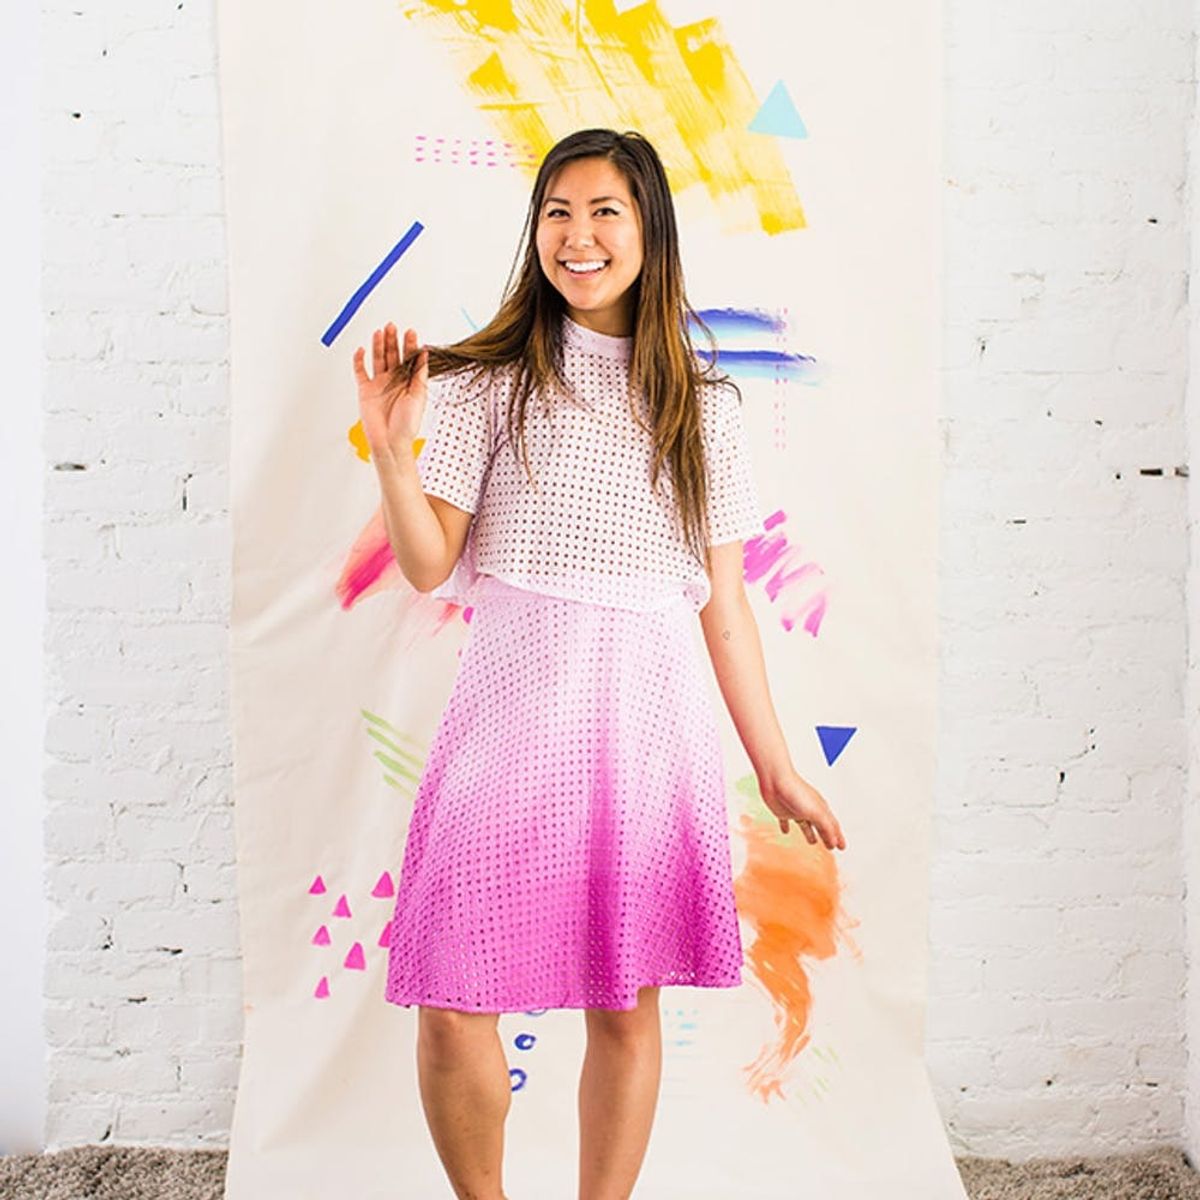 Jump into Spring With This DIY Dip Dye Ombré Dress